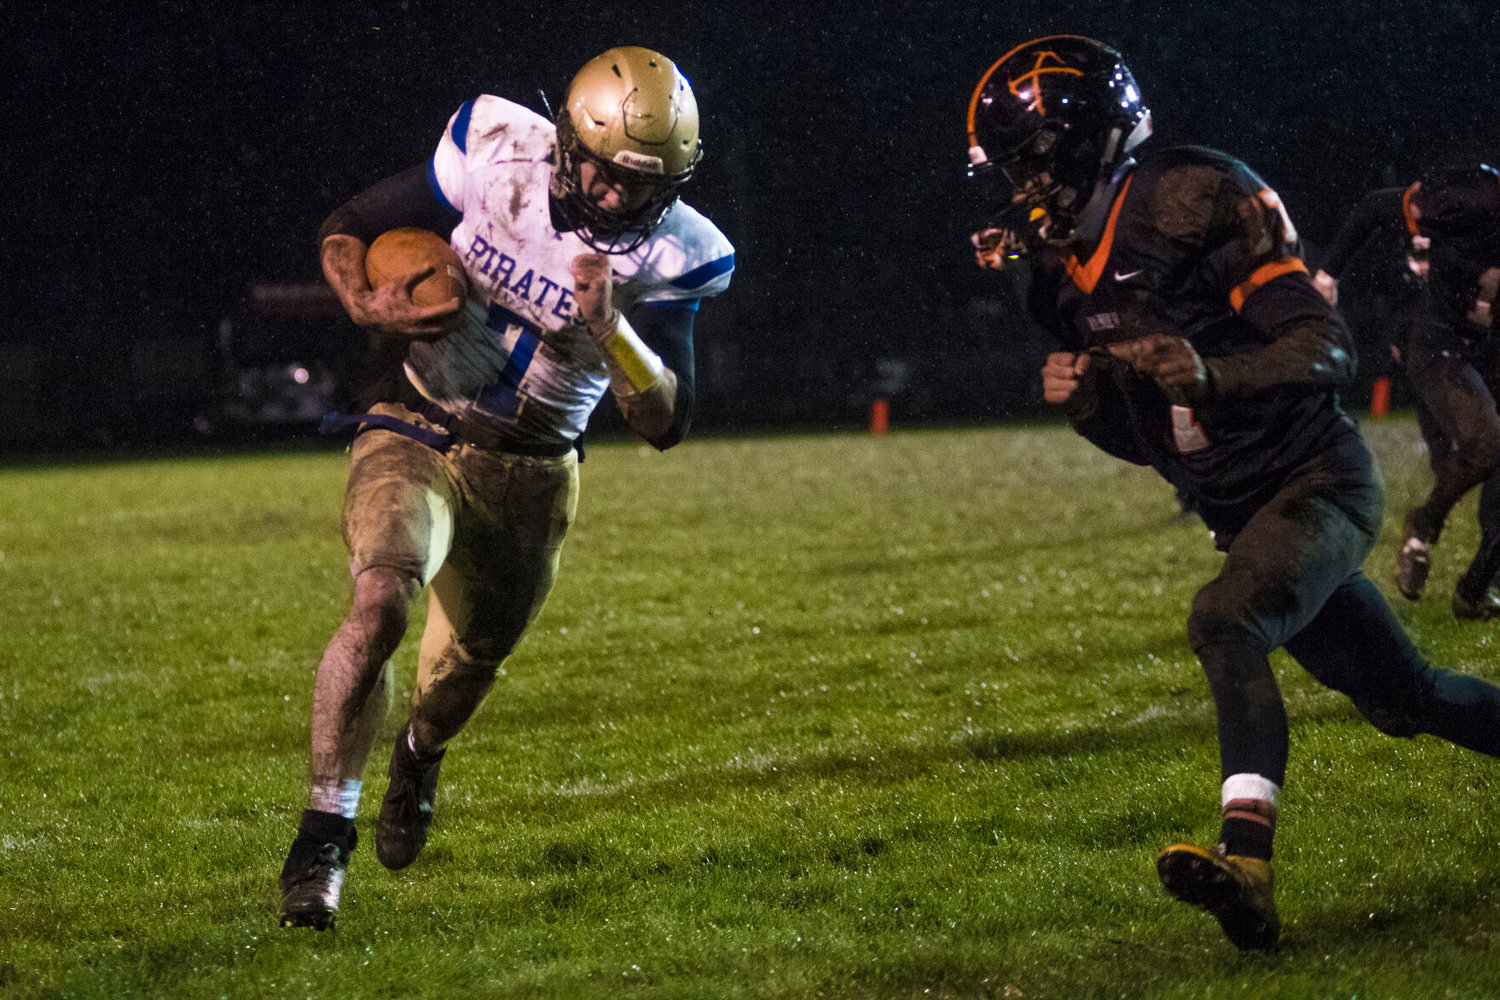 Adna running back Zach Berg braces for a collision with a Rainier defender Friday.